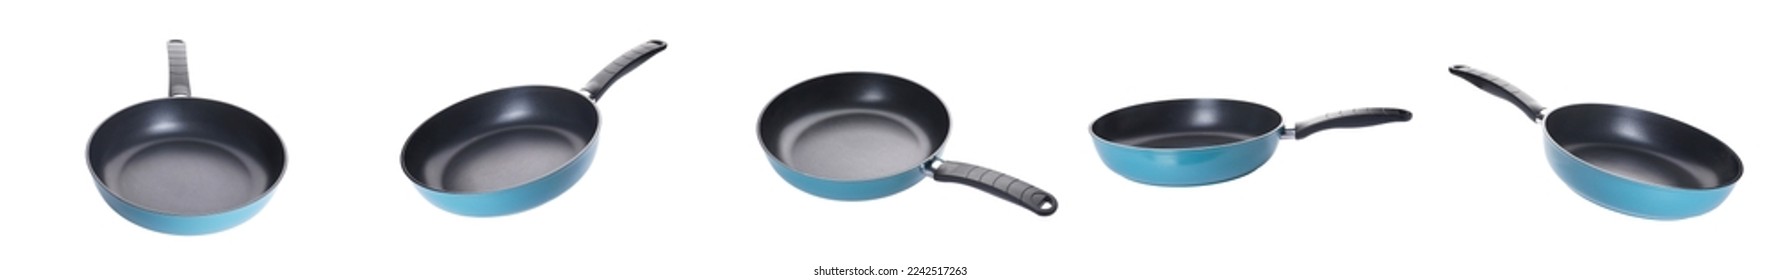 New frying pan isolated on a white background. - Shutterstock ID 2242517263